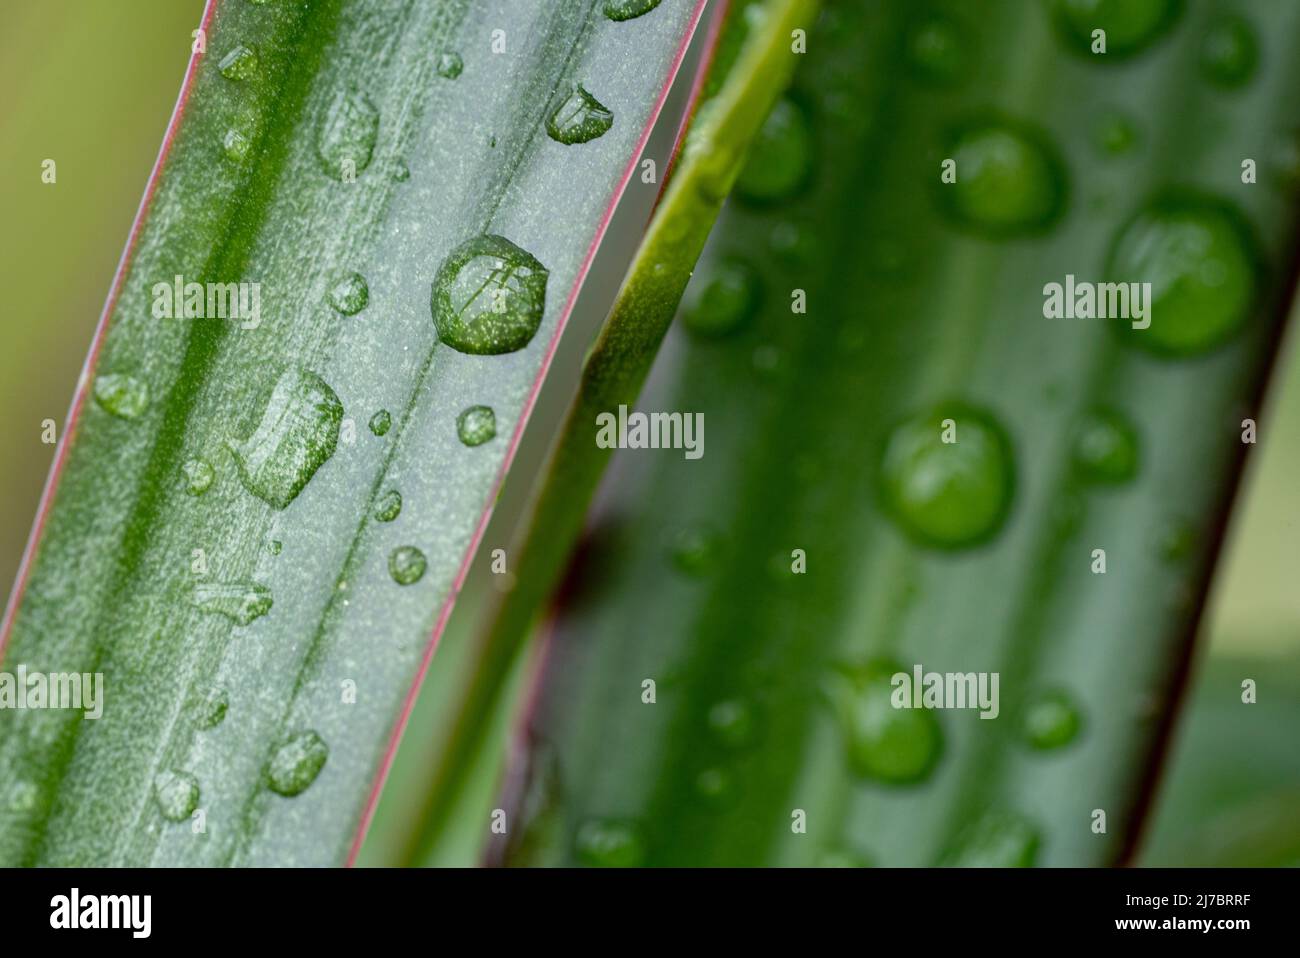 After the rain: Close-up of rain drops on palm leaves Stock Photo